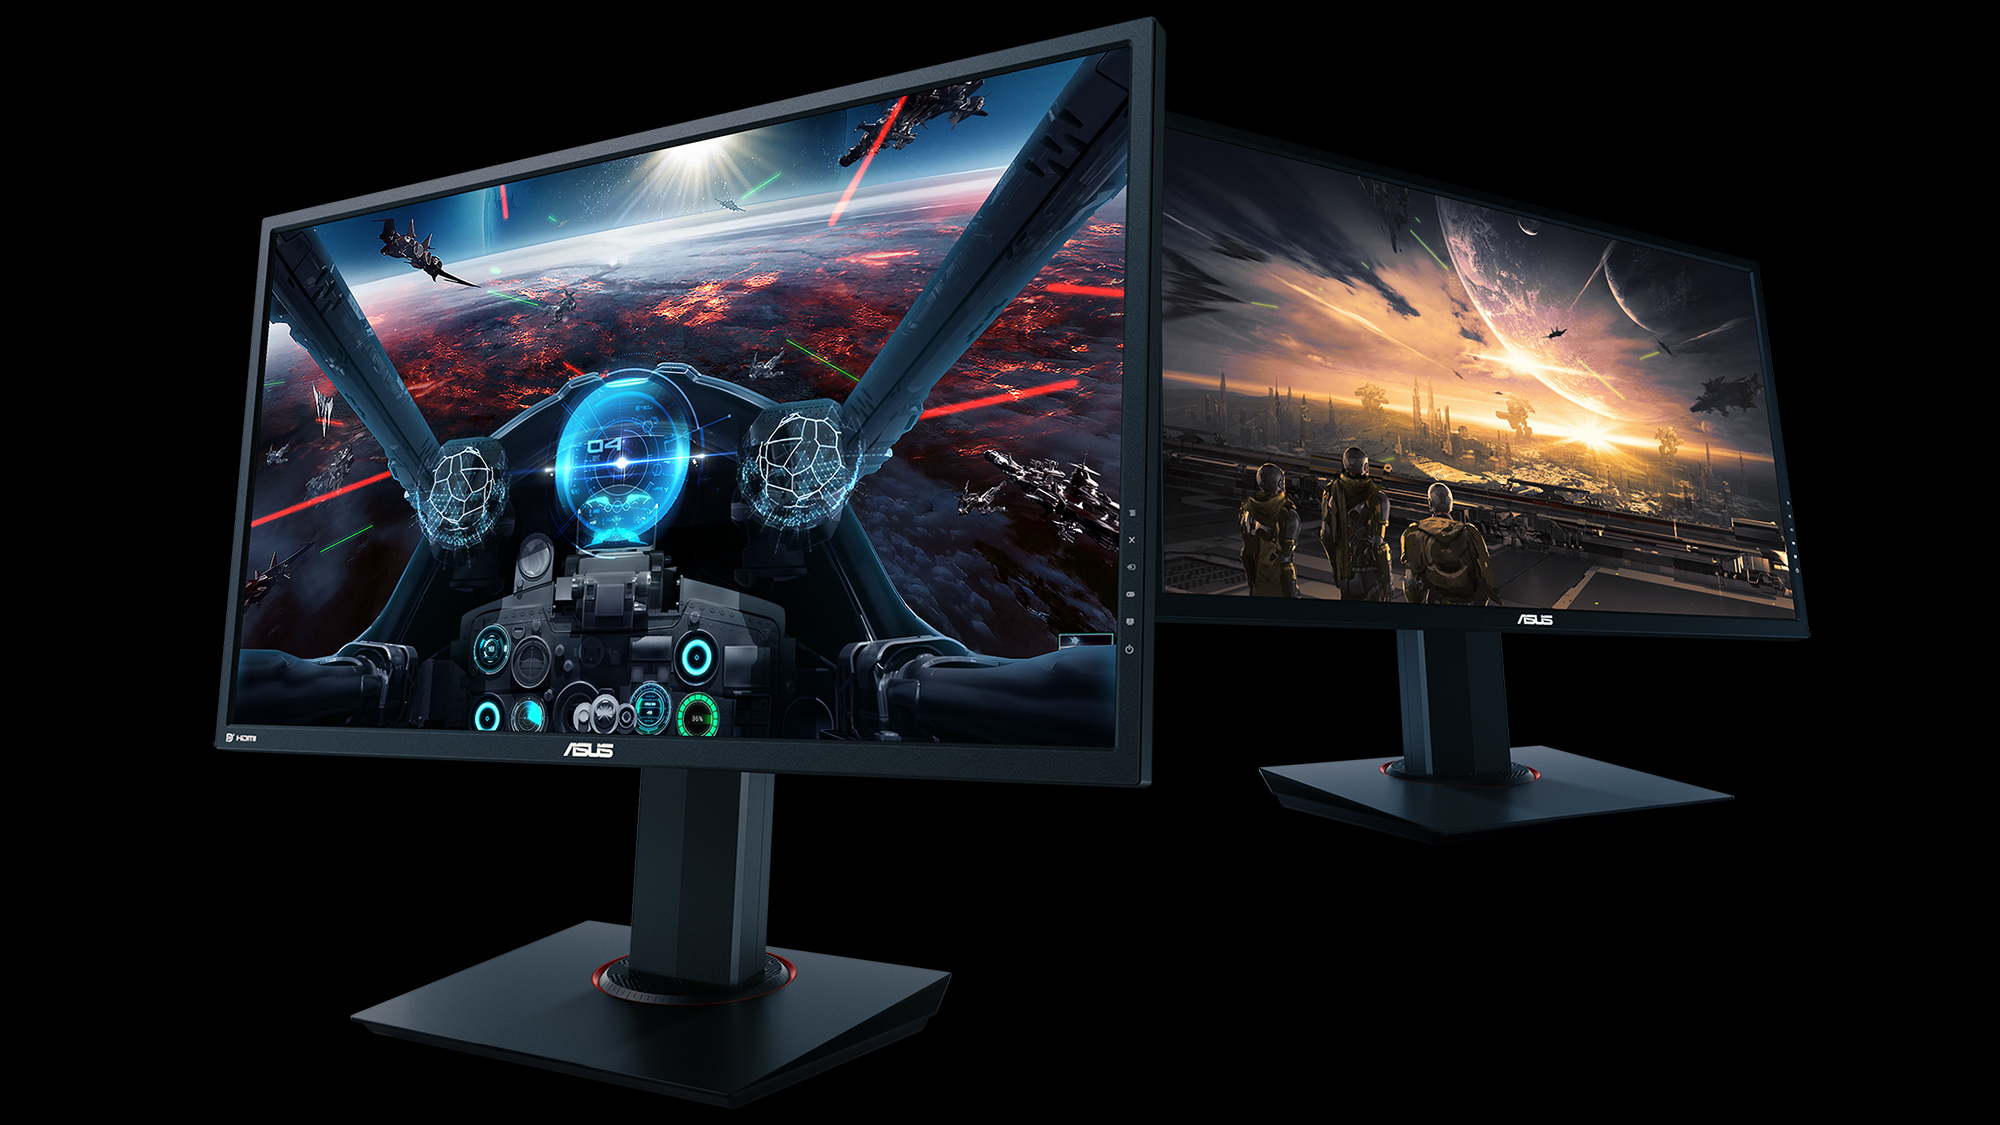 Get in Gear: PC Gaming Gadgets and Accessories